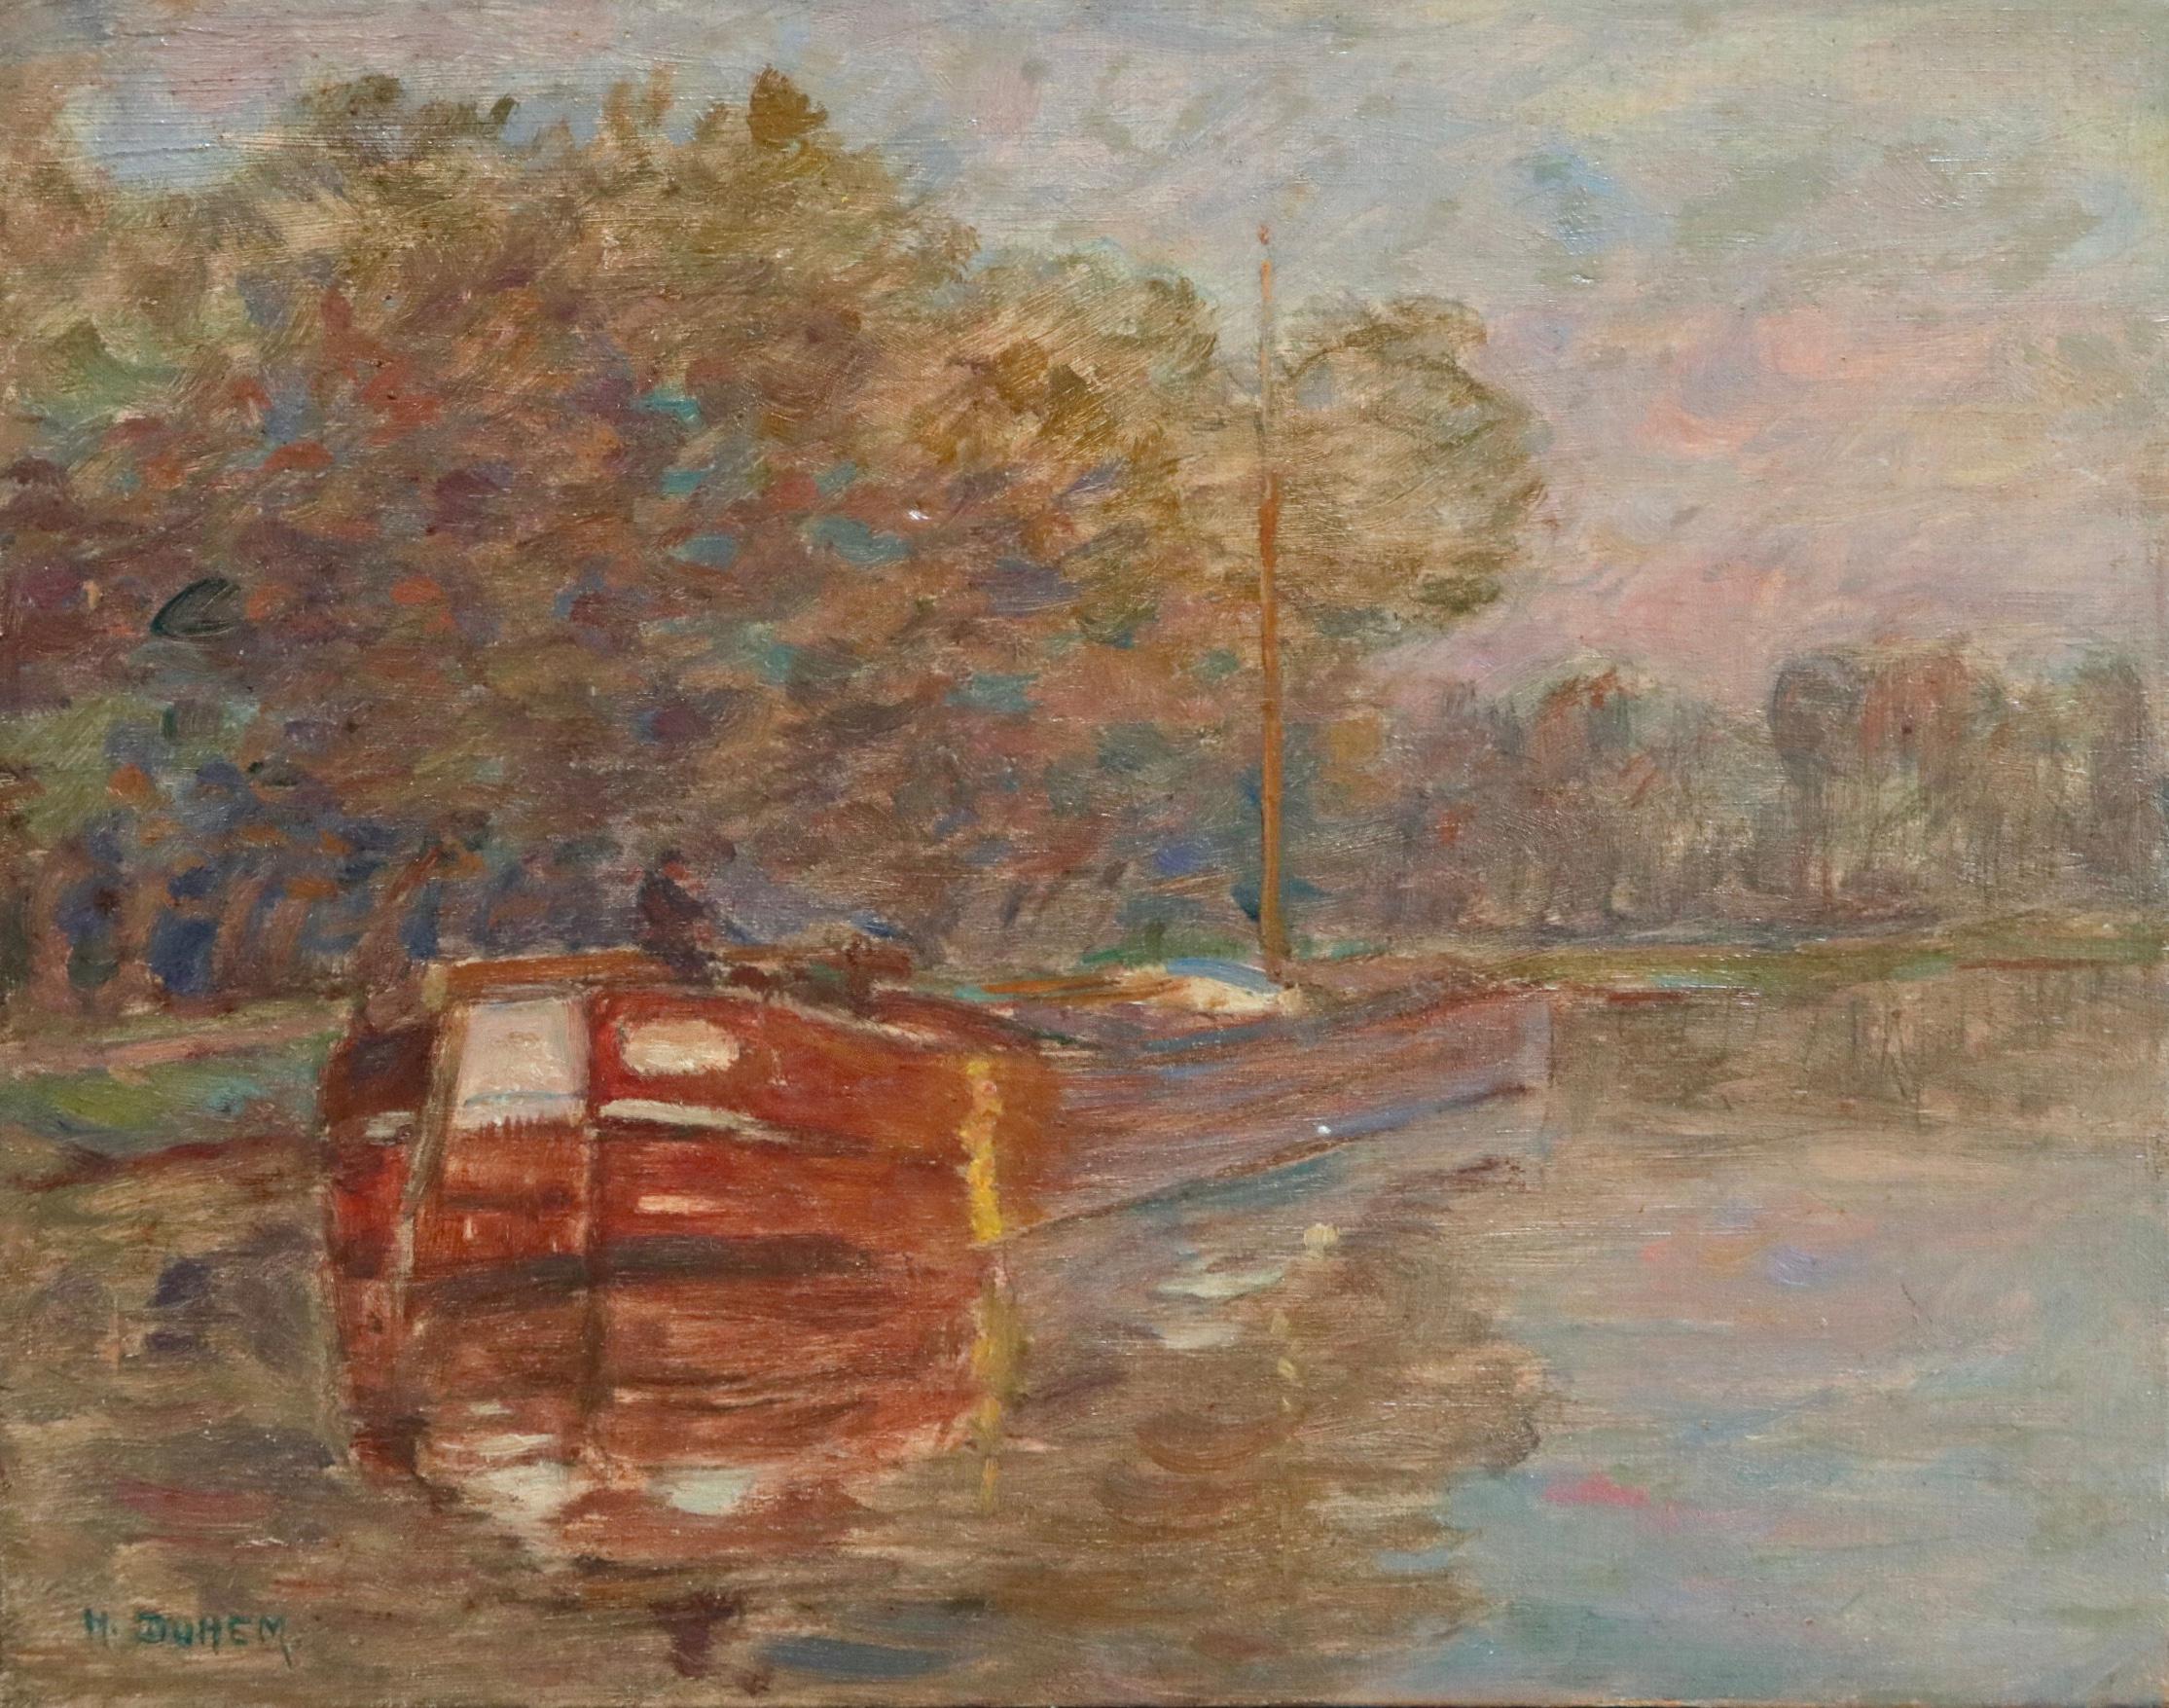 Barge on Canal, Douai - 19th Century Oil, Boat on River Landscape by Henri Duhem